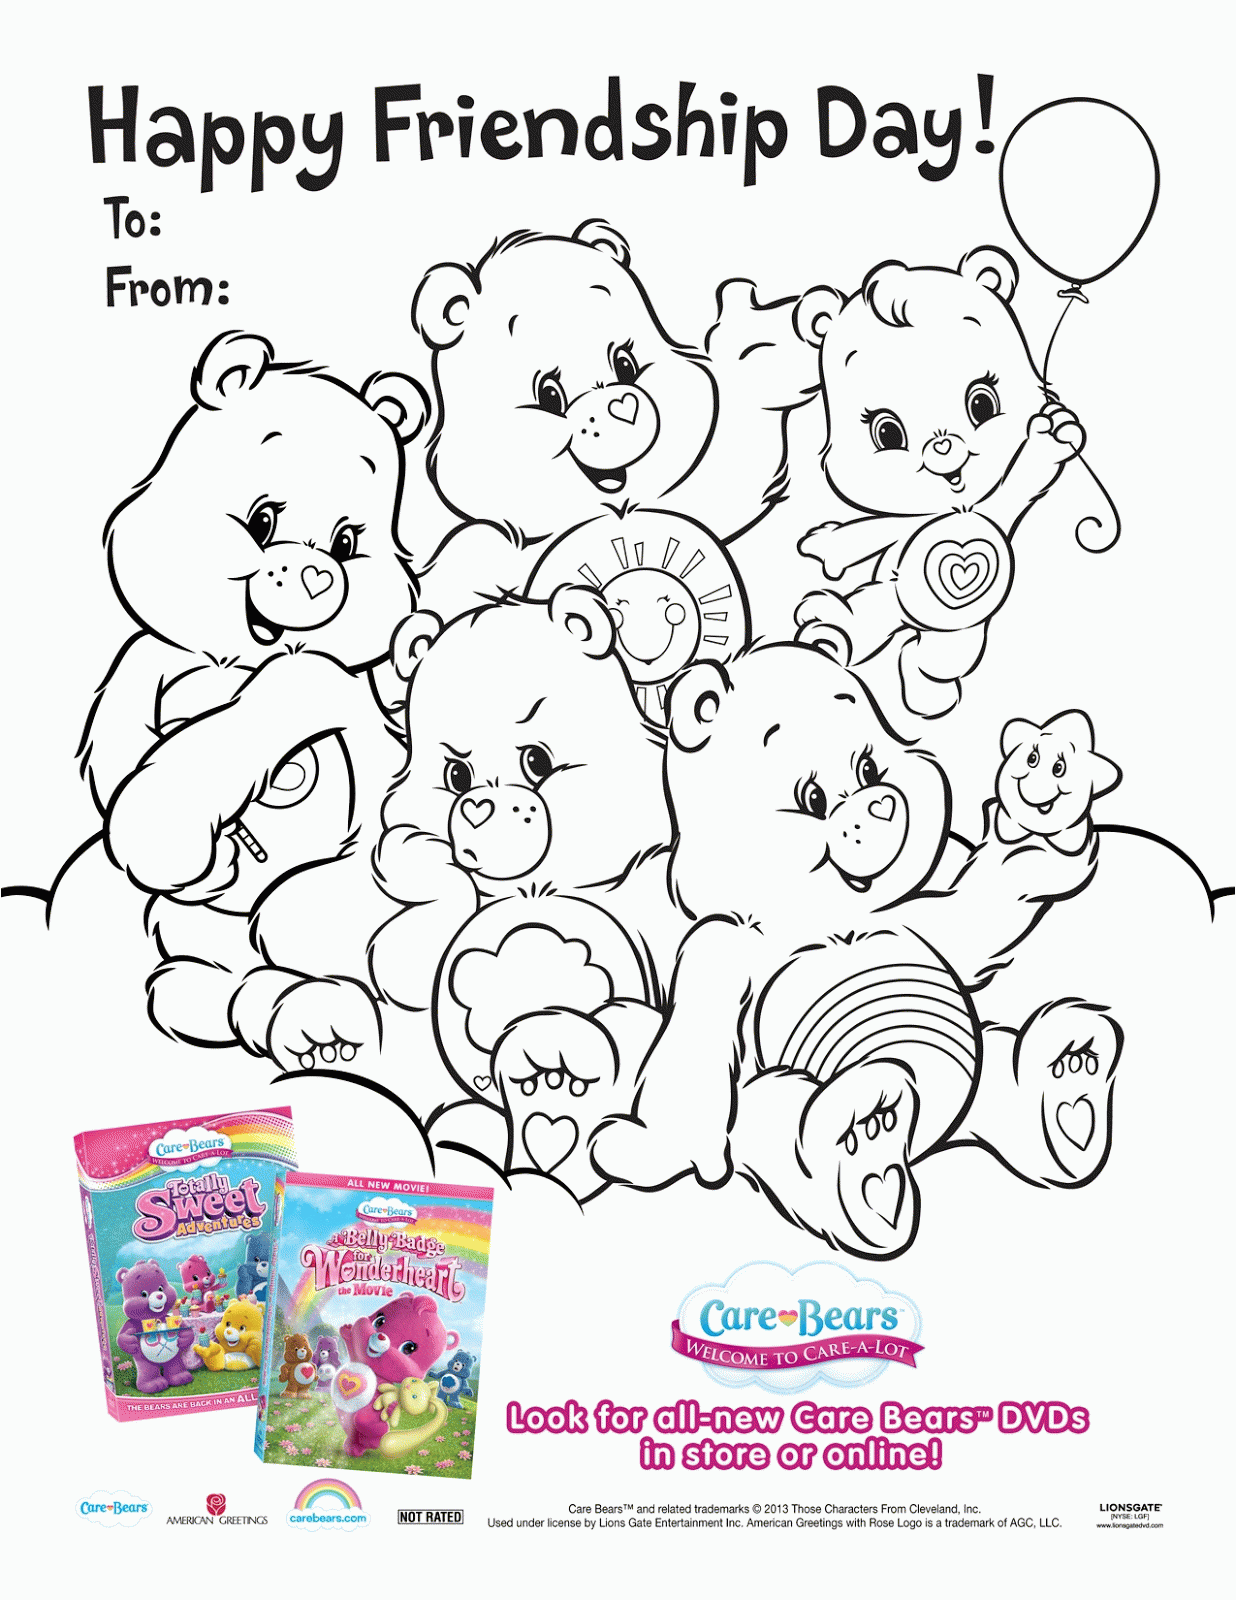 Happy Friendship Day Coloring Pages 2016 - Friendship Day Coloring ...